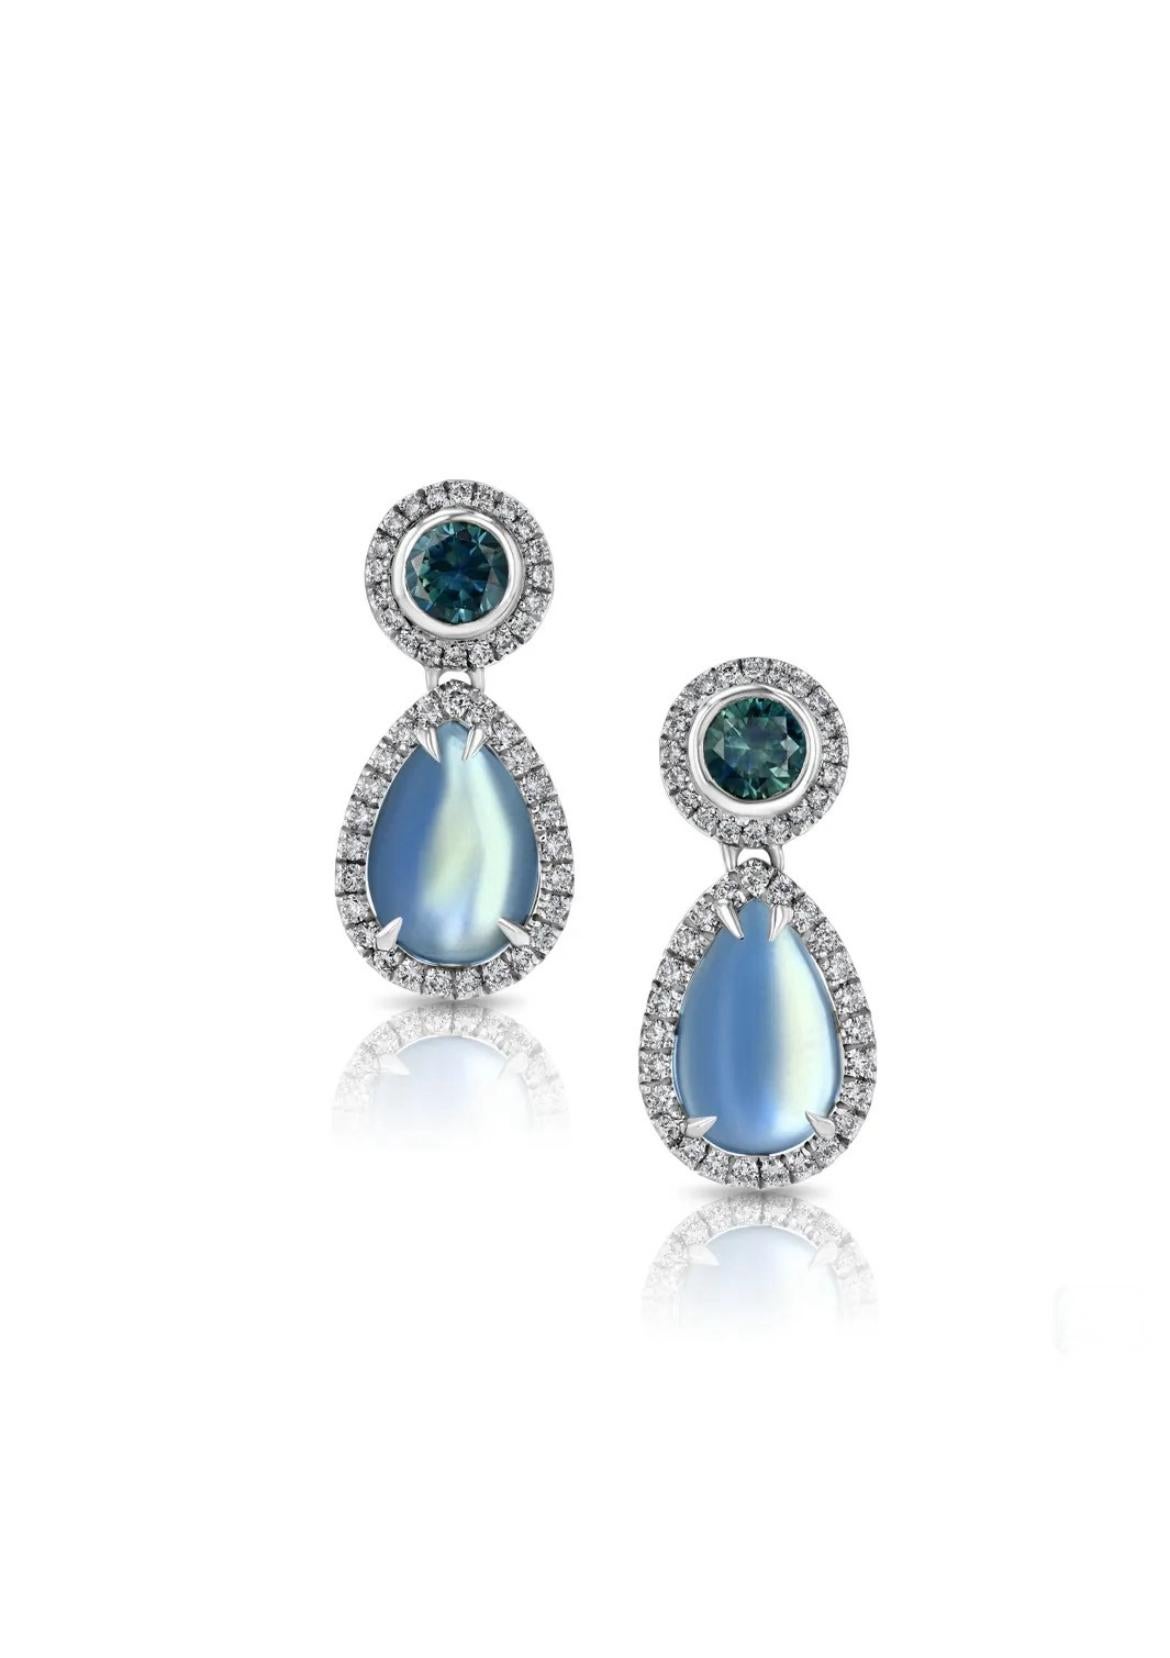 18K white gold earrings, featuring two luminous pear-shaped Moonstones totaling 7.67cts, paired with two round Montana Sapphires totaling  1.54cts, accented by twinkling round diamonds totaling 0.71cts. 

Moonstone’s delicate beauty and its